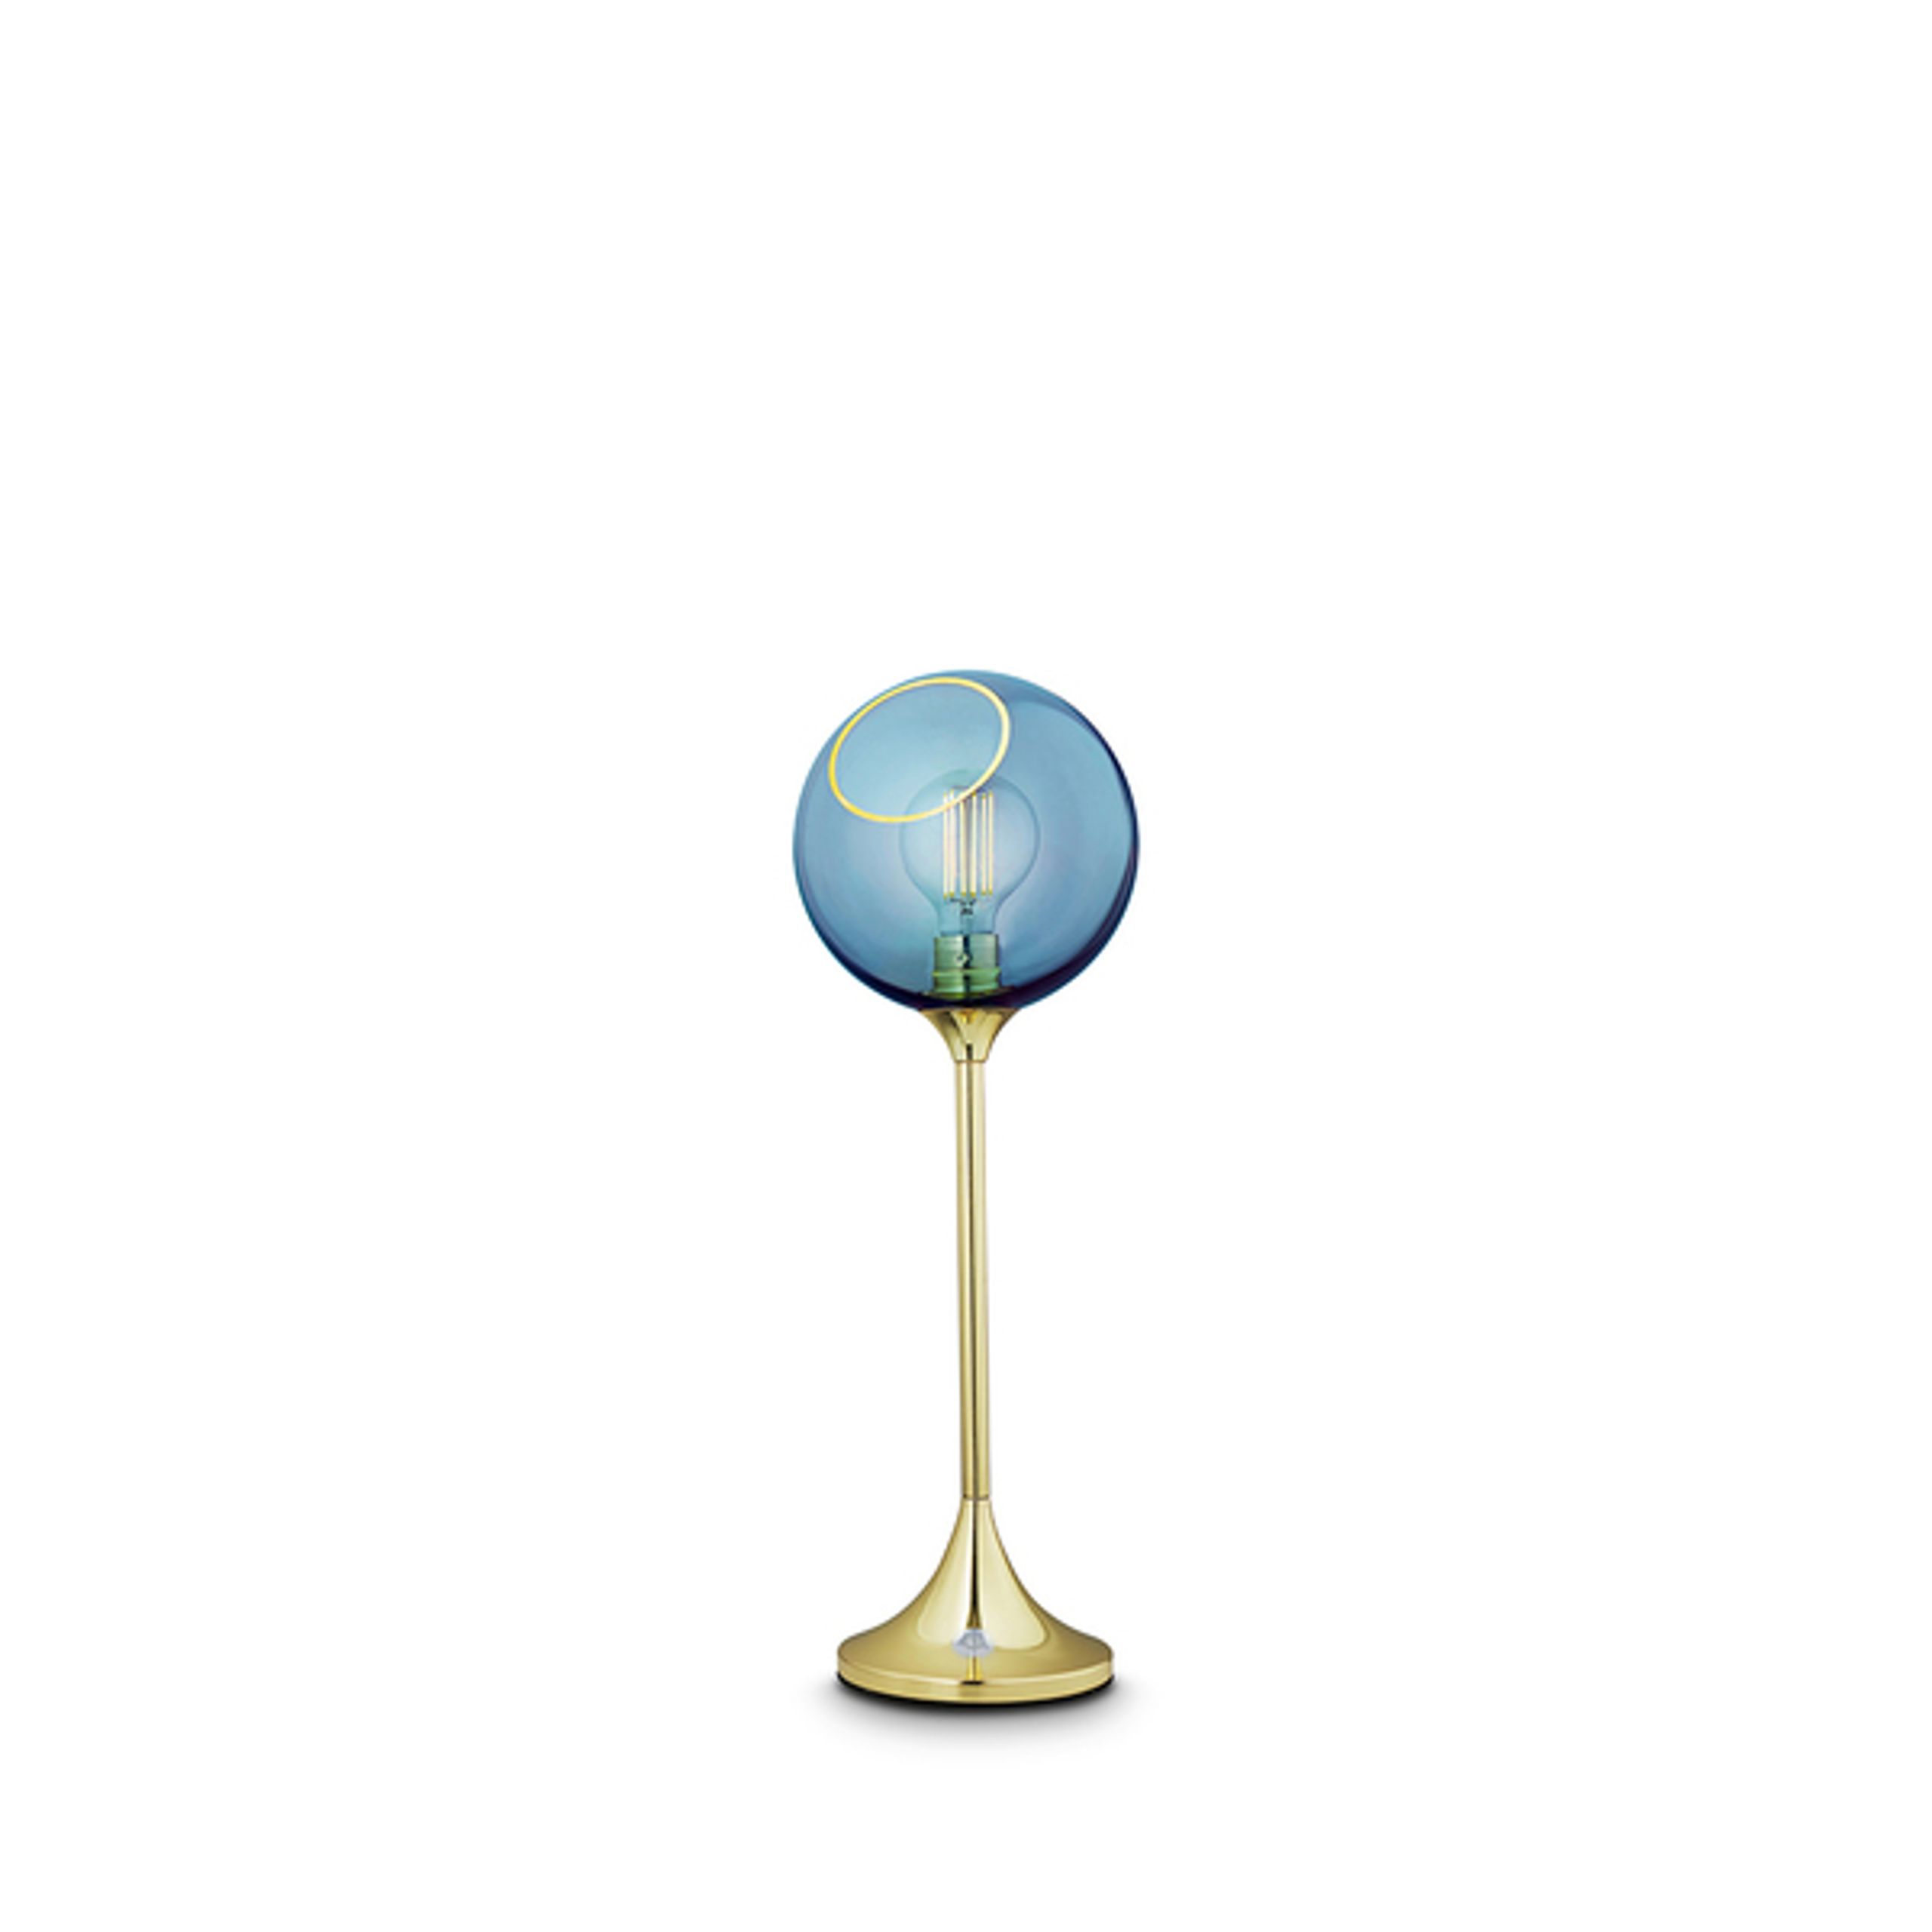 Design By Us - Lampe de table - Ballroom Table Lamp - Blue/Gold